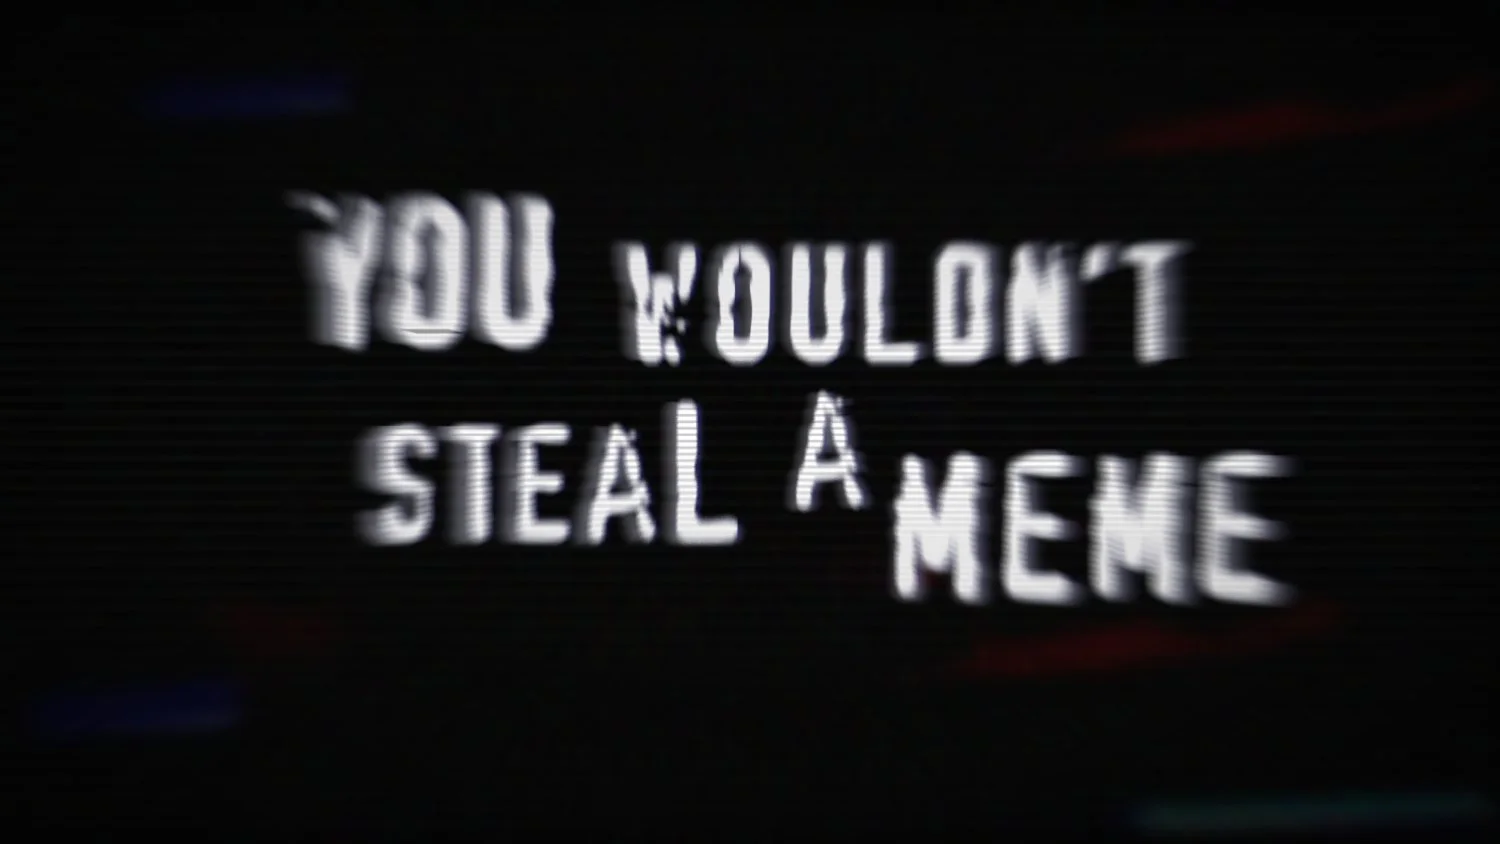 You wouldn't steal a meme